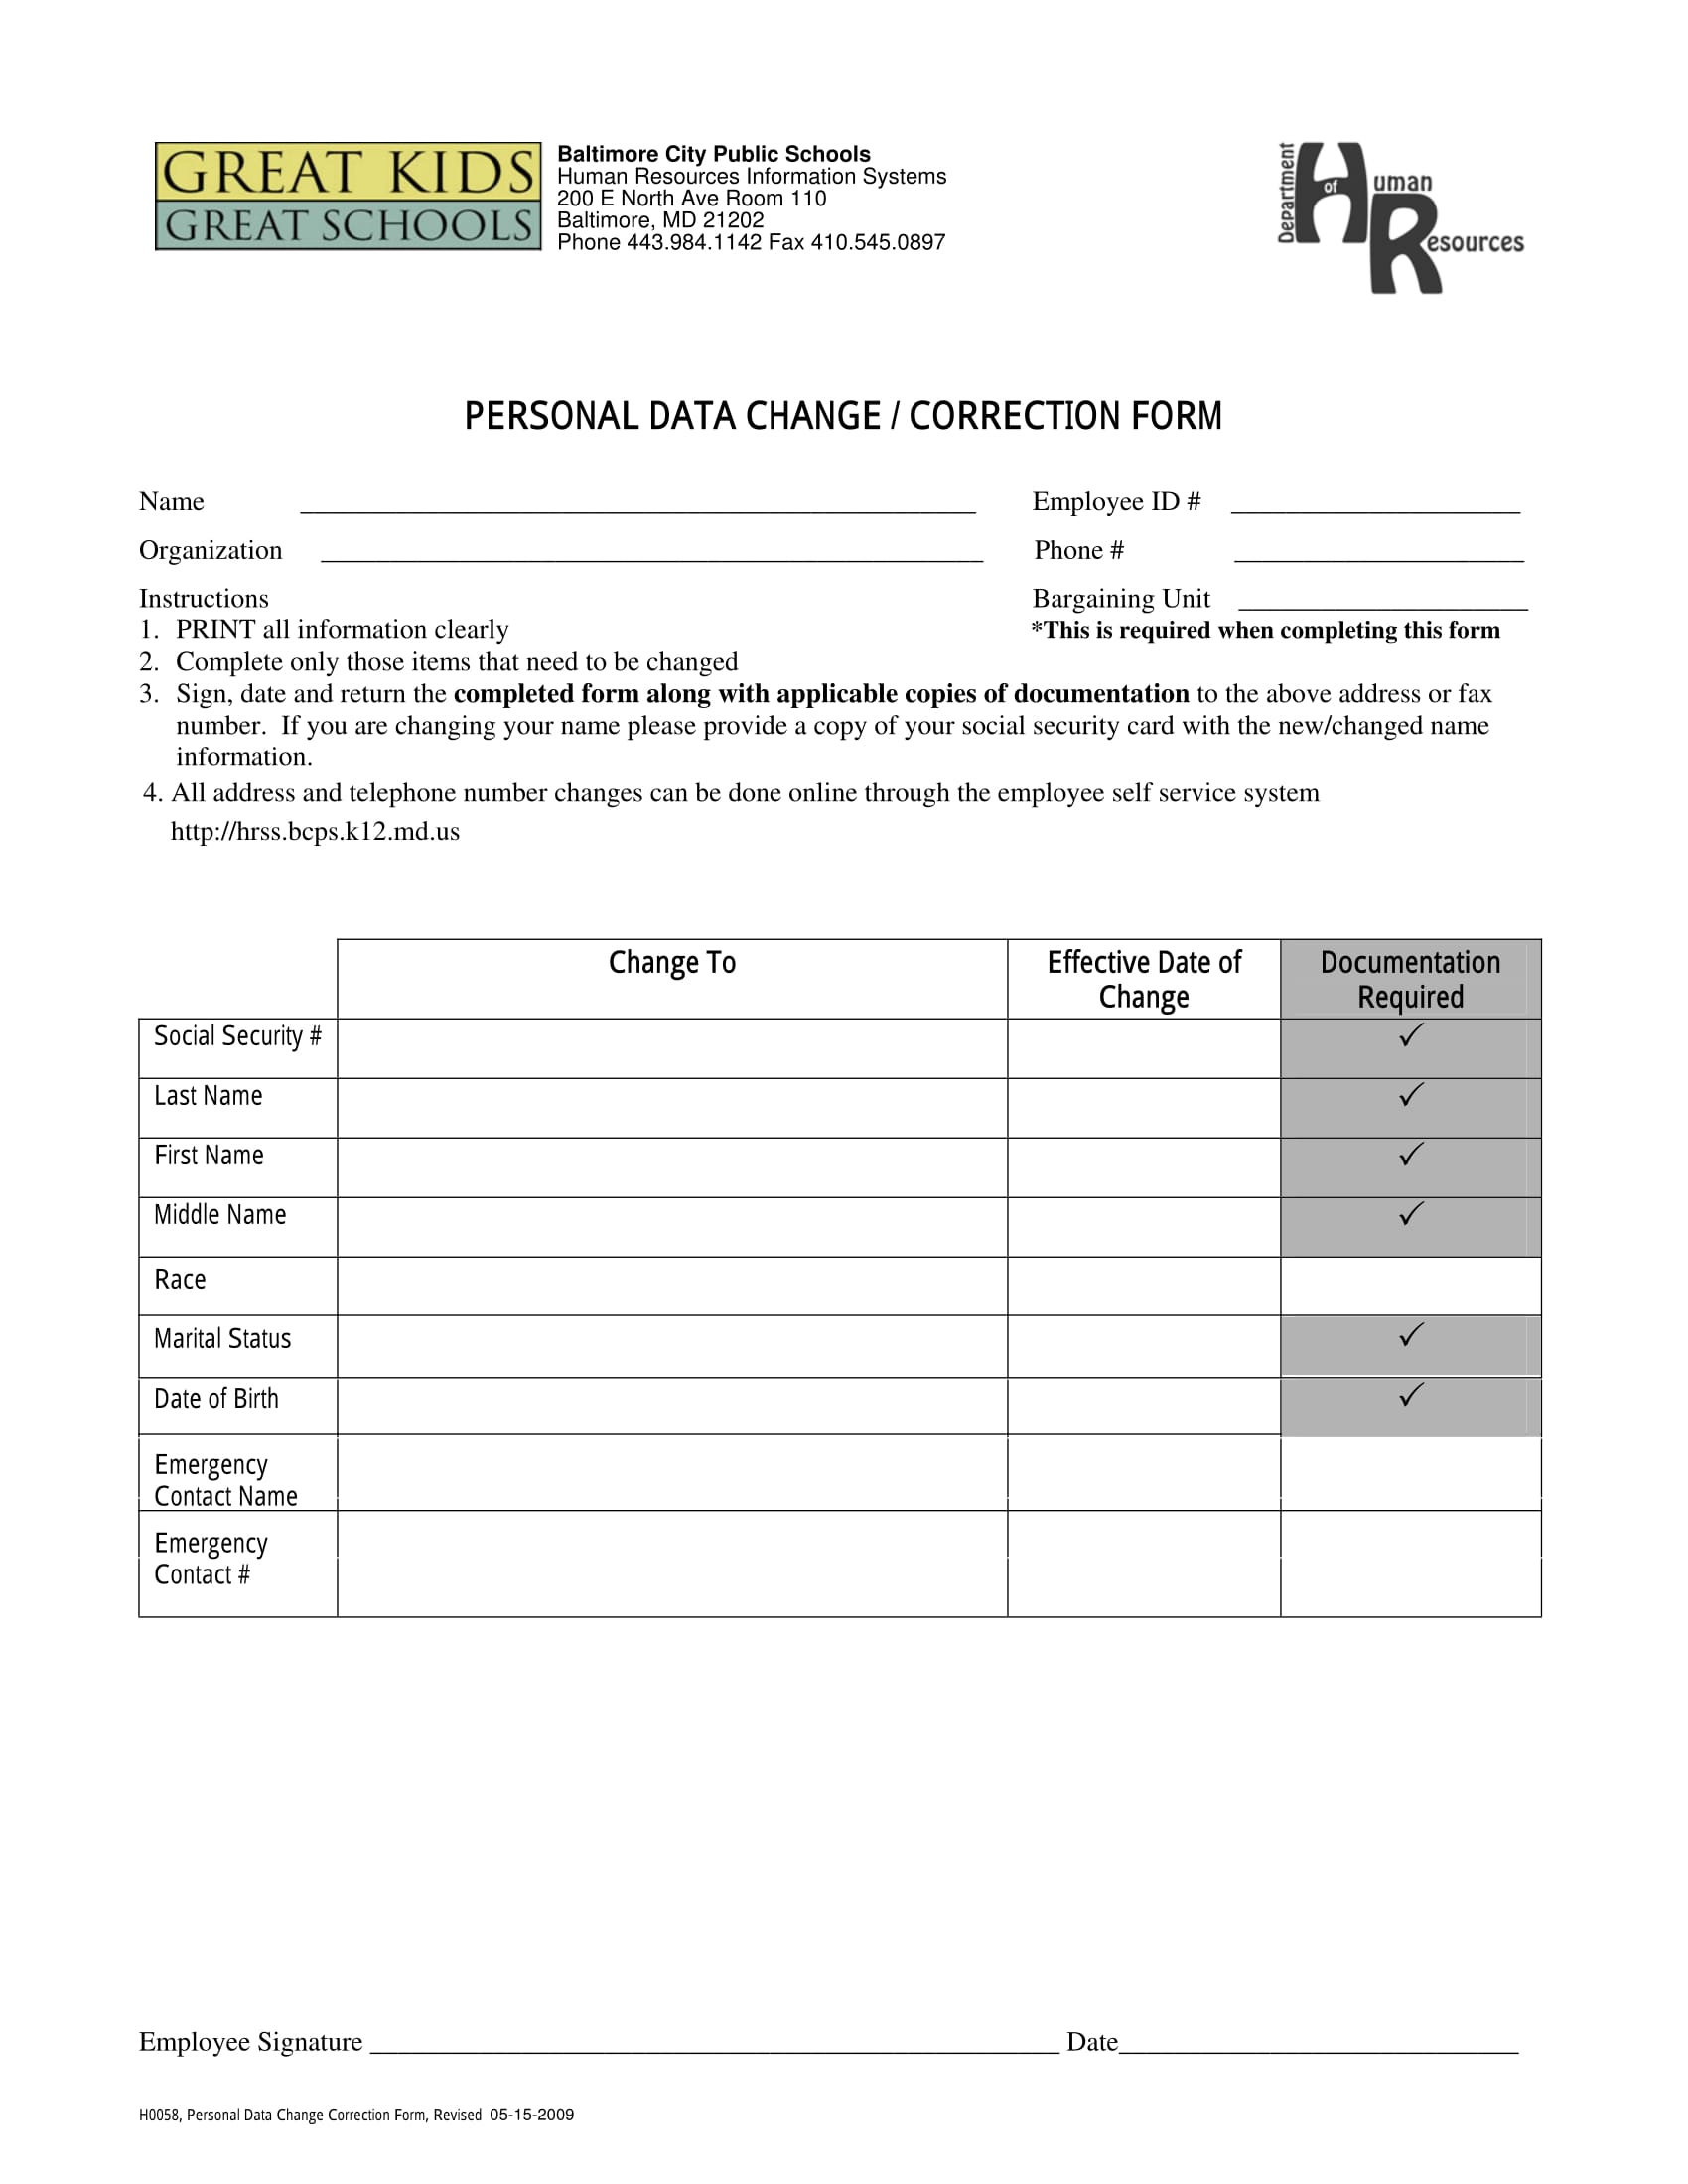 employee personal data correction form 1